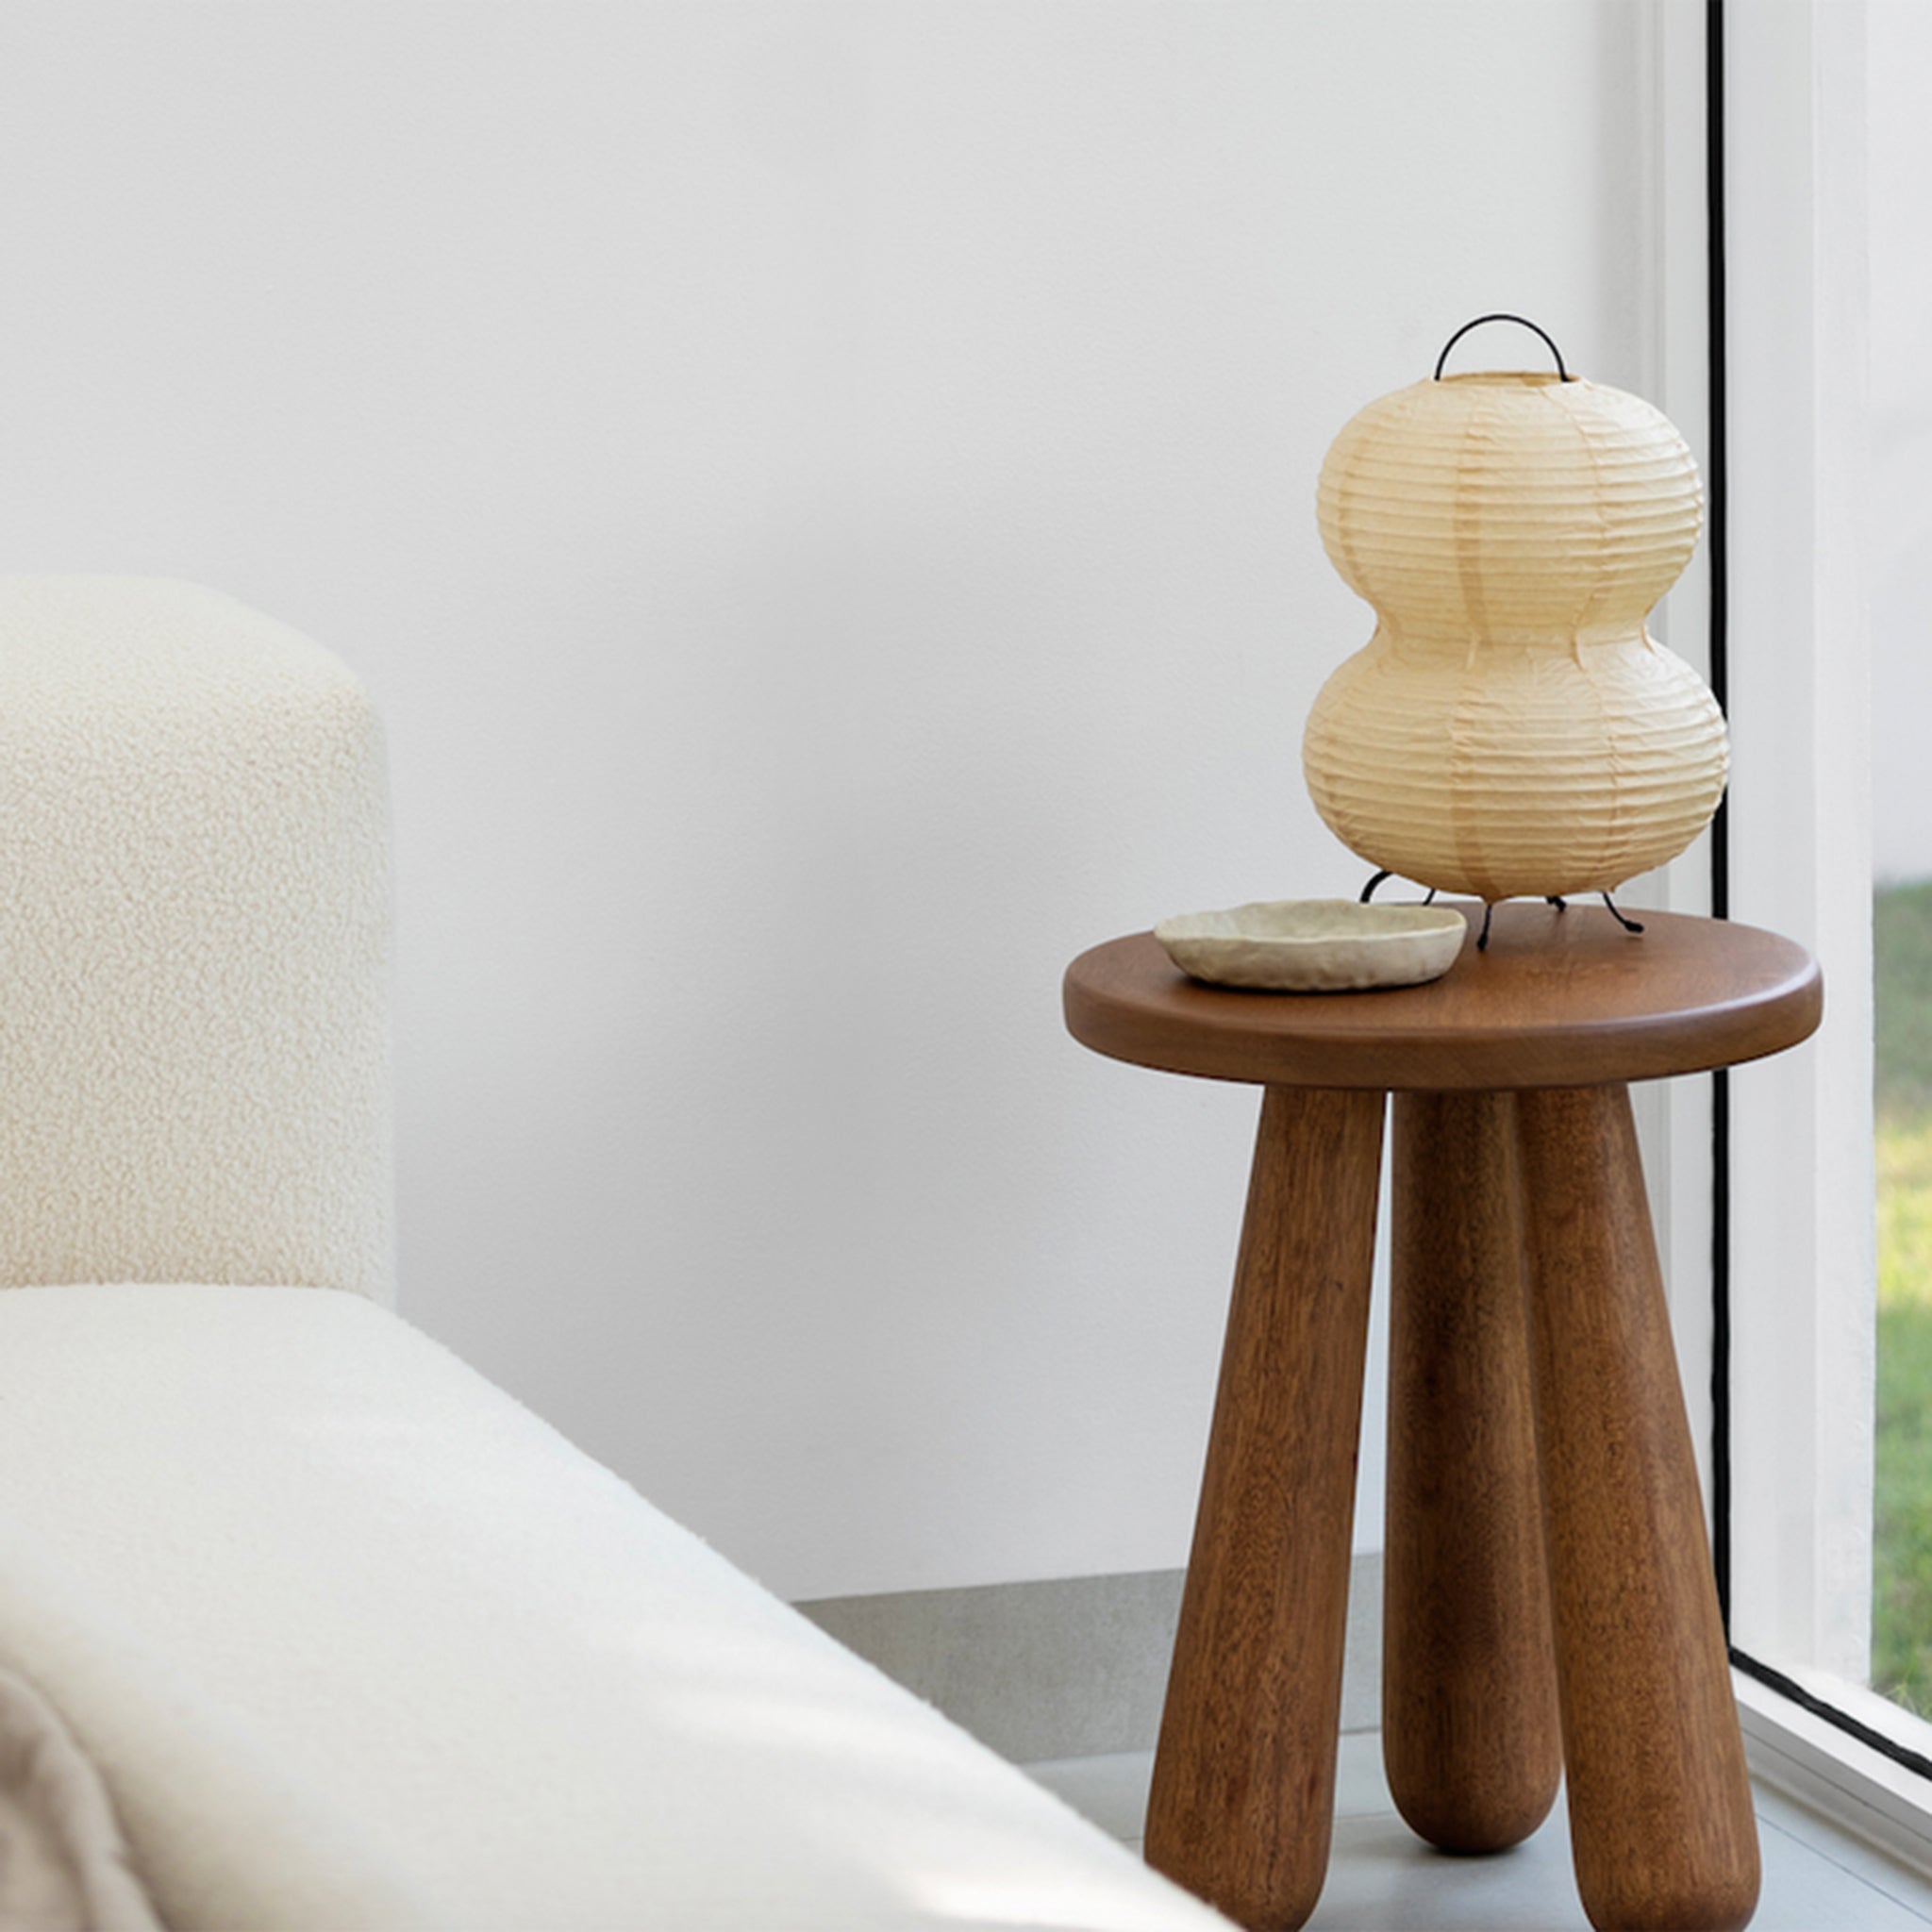 Wooden side table with chunky legs, decorated with a paper lantern and a small dish, next to a white sofa in a minimalist living room